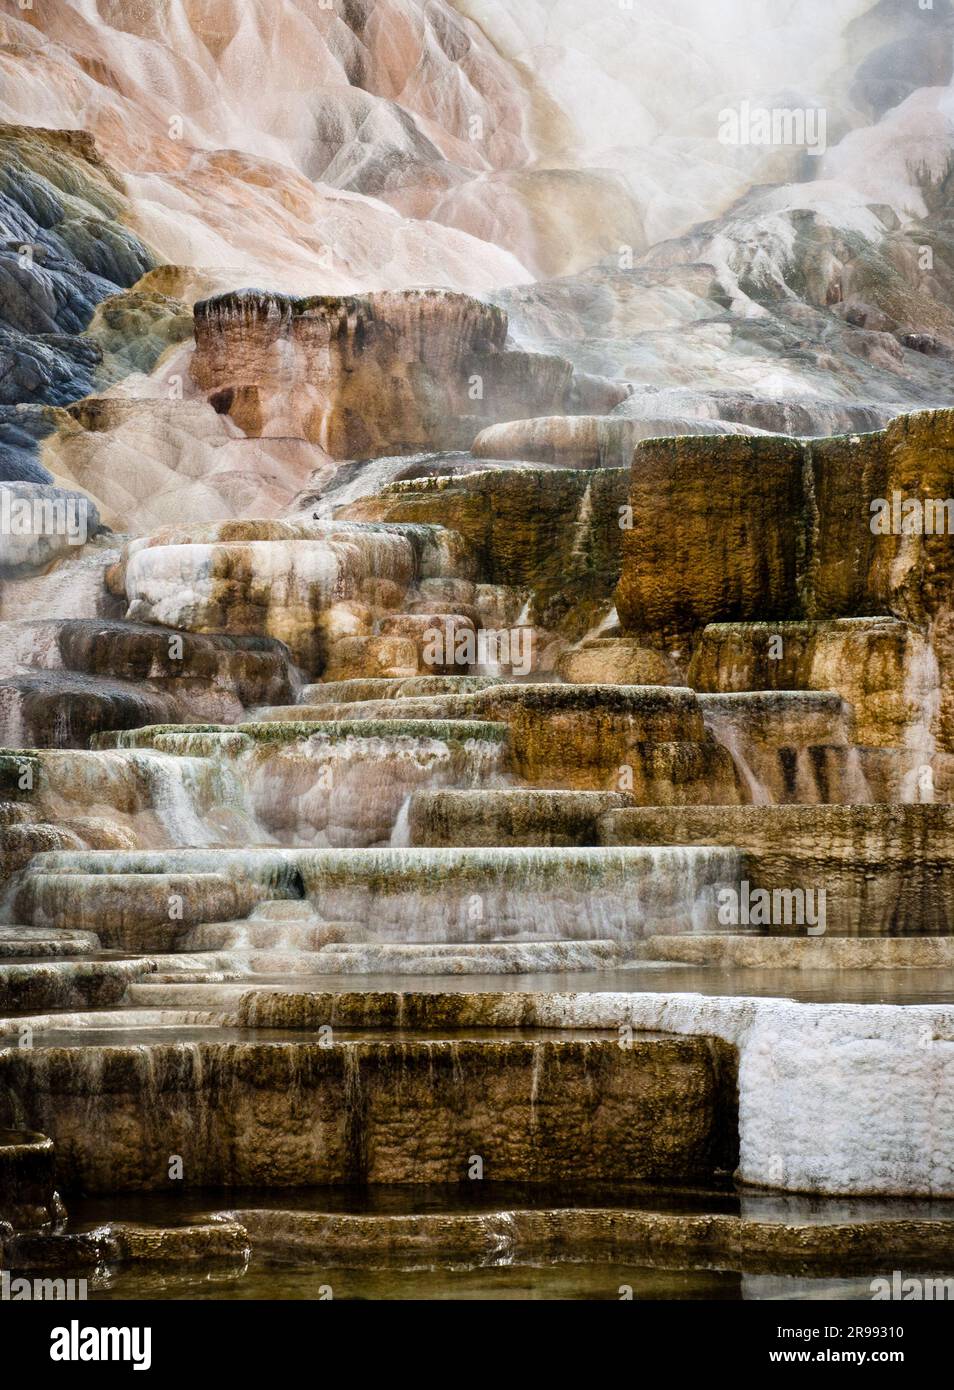 Travertine (limestone) terraces of Palette Springs in late winter, formed by volcanic activity of the Yellowstone Caldera, Yellowstone National Park, Stock Photo